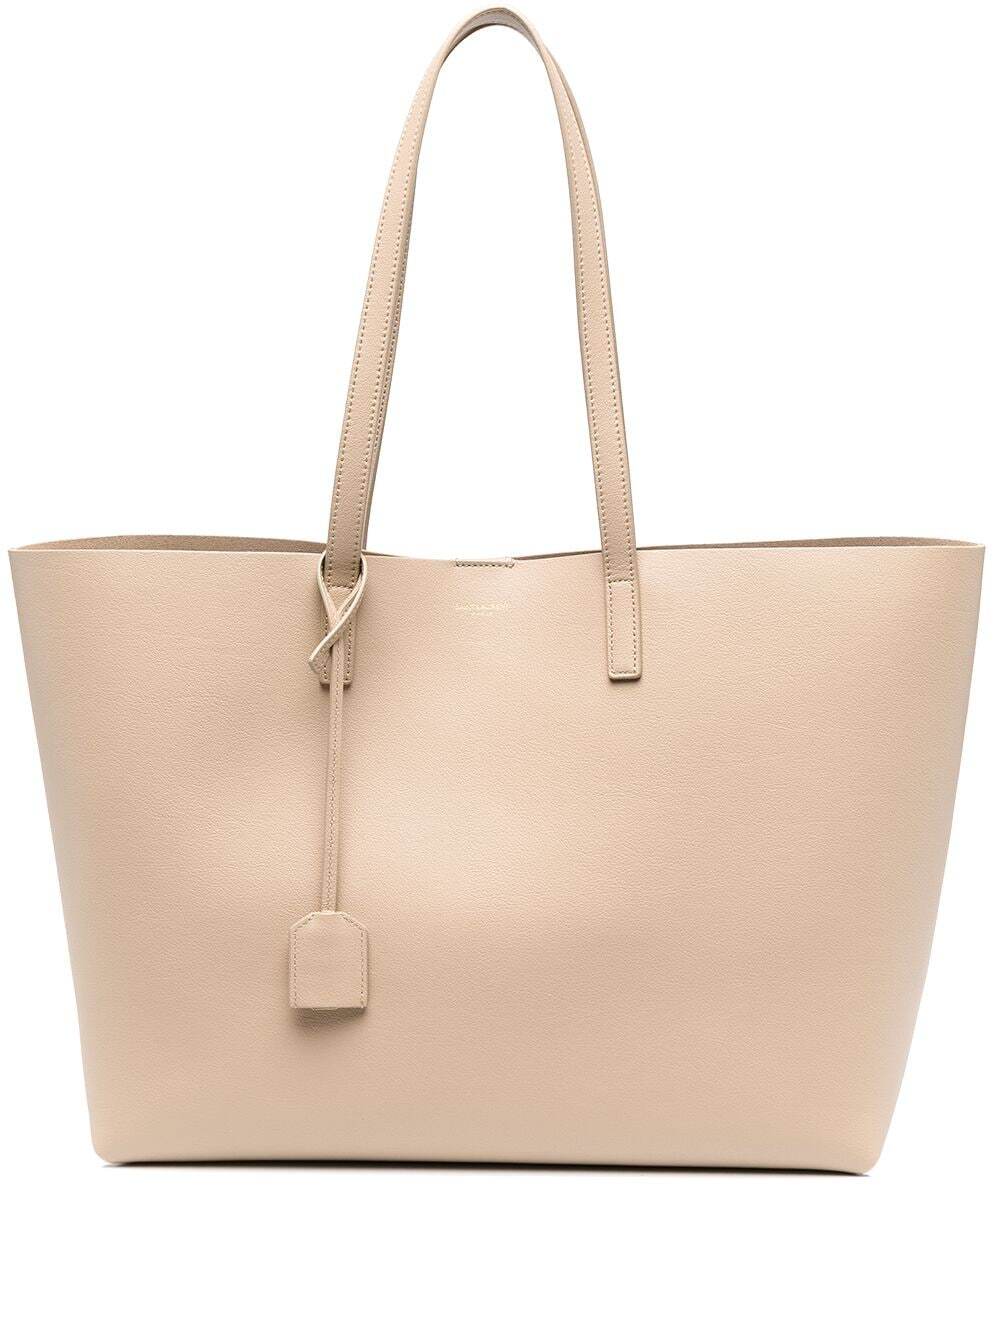 Shopping tote bag in beige